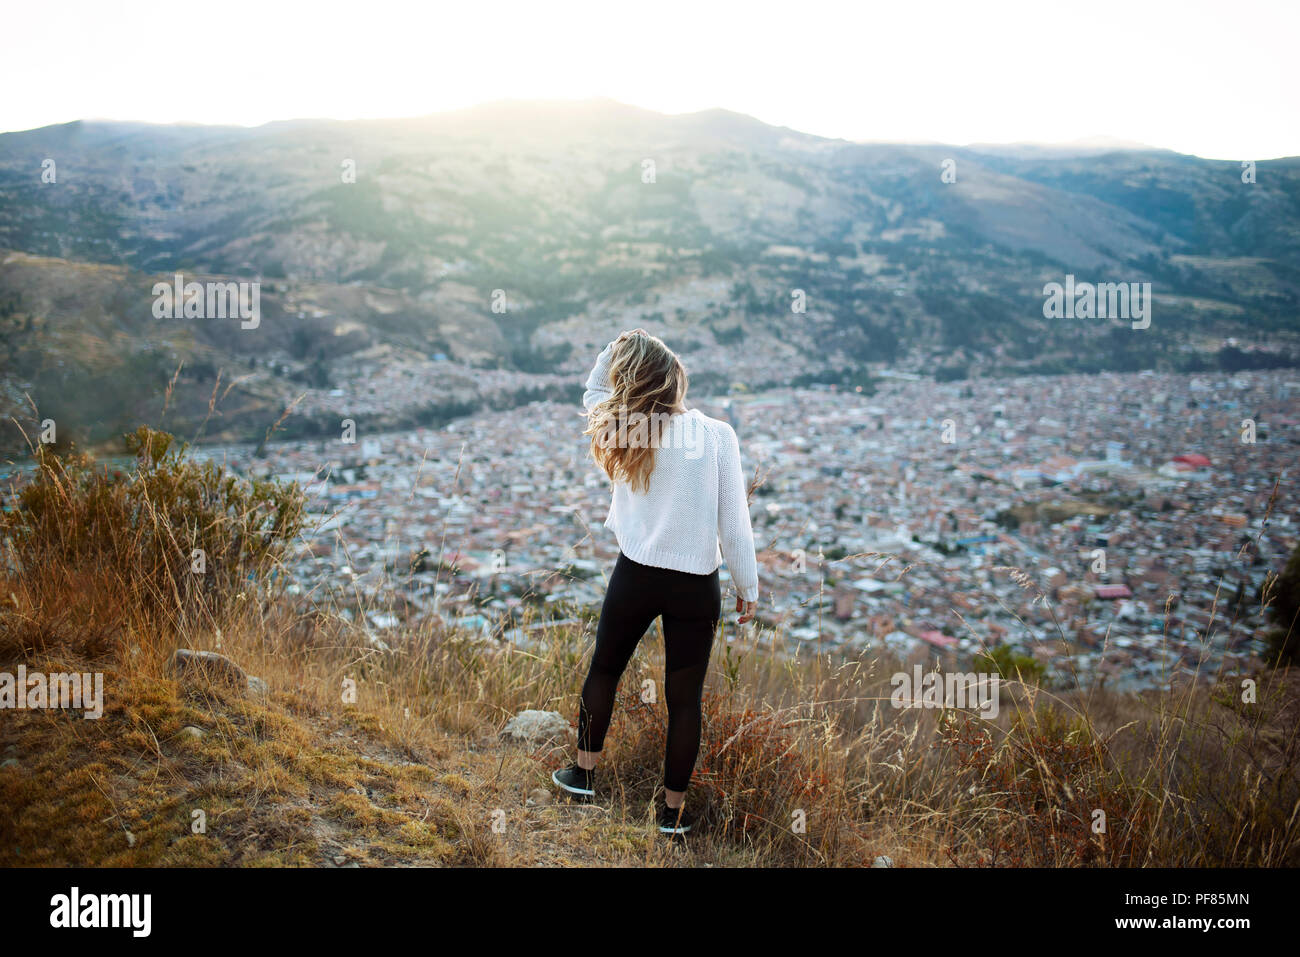 Rear view of female playing with her hair, looking at scenic views of Huaraz, Peru. Travel lifestyle in South America. Jul 2018 Stock Photo